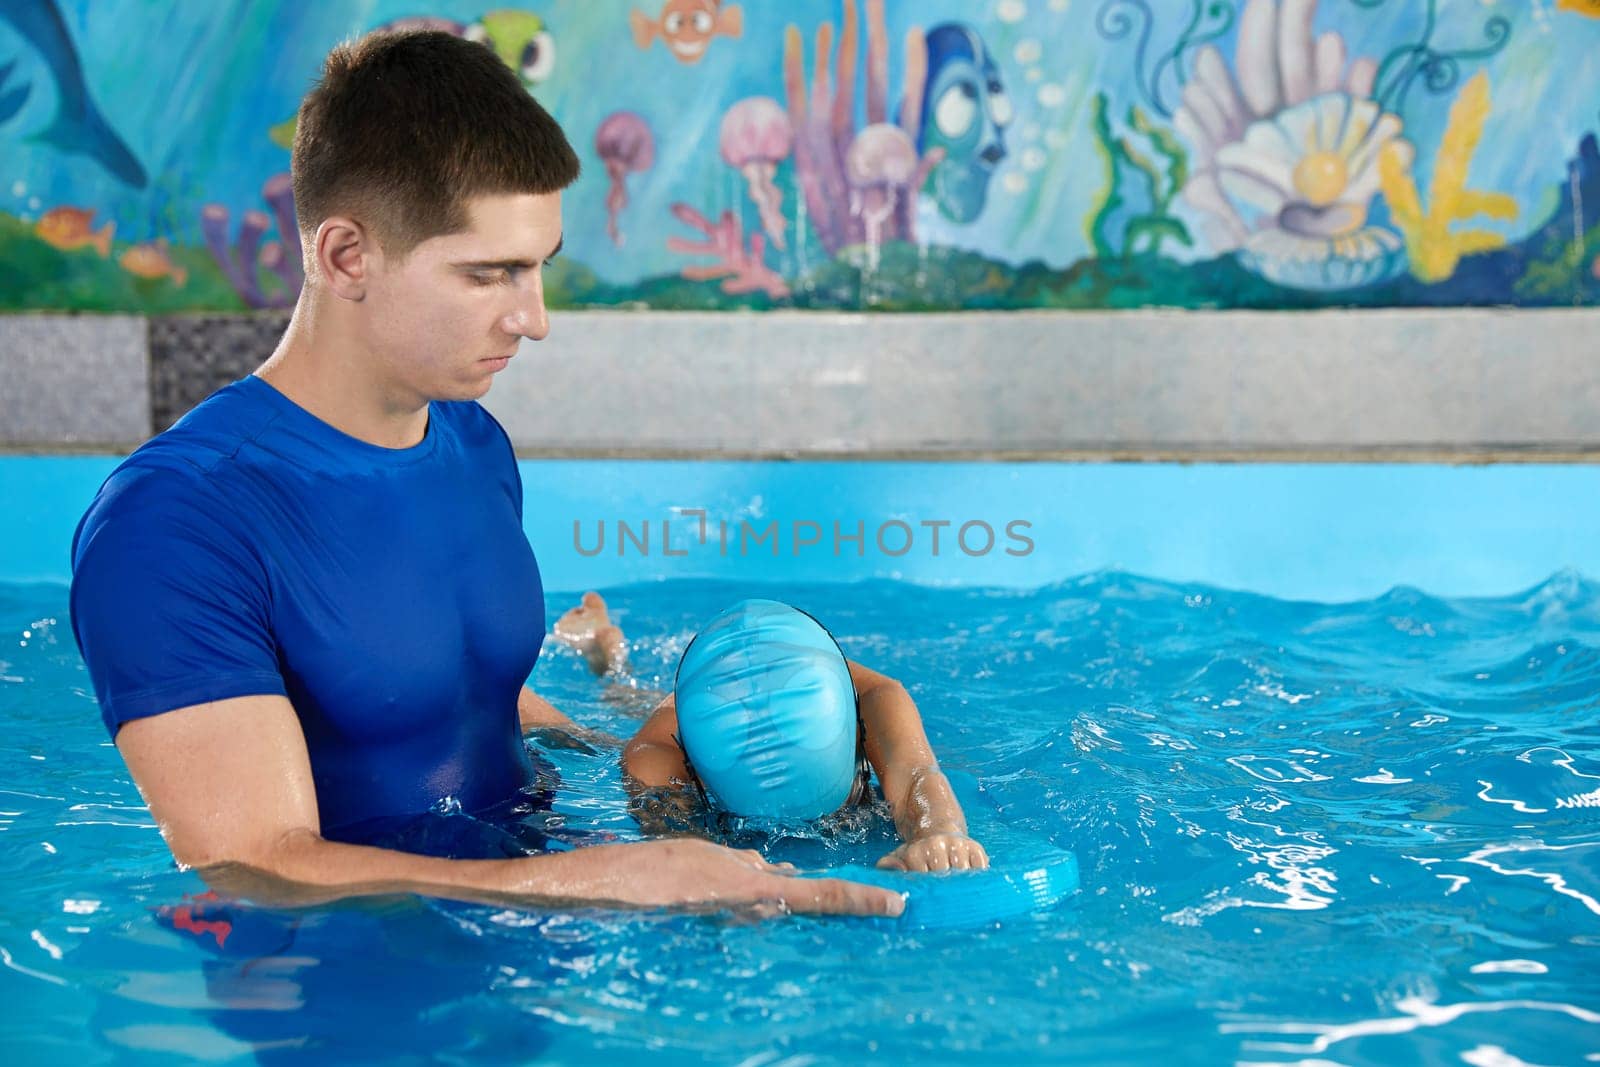 Trainer teaching little boy how to swim in indoor pool with pool floating board by Mariakray